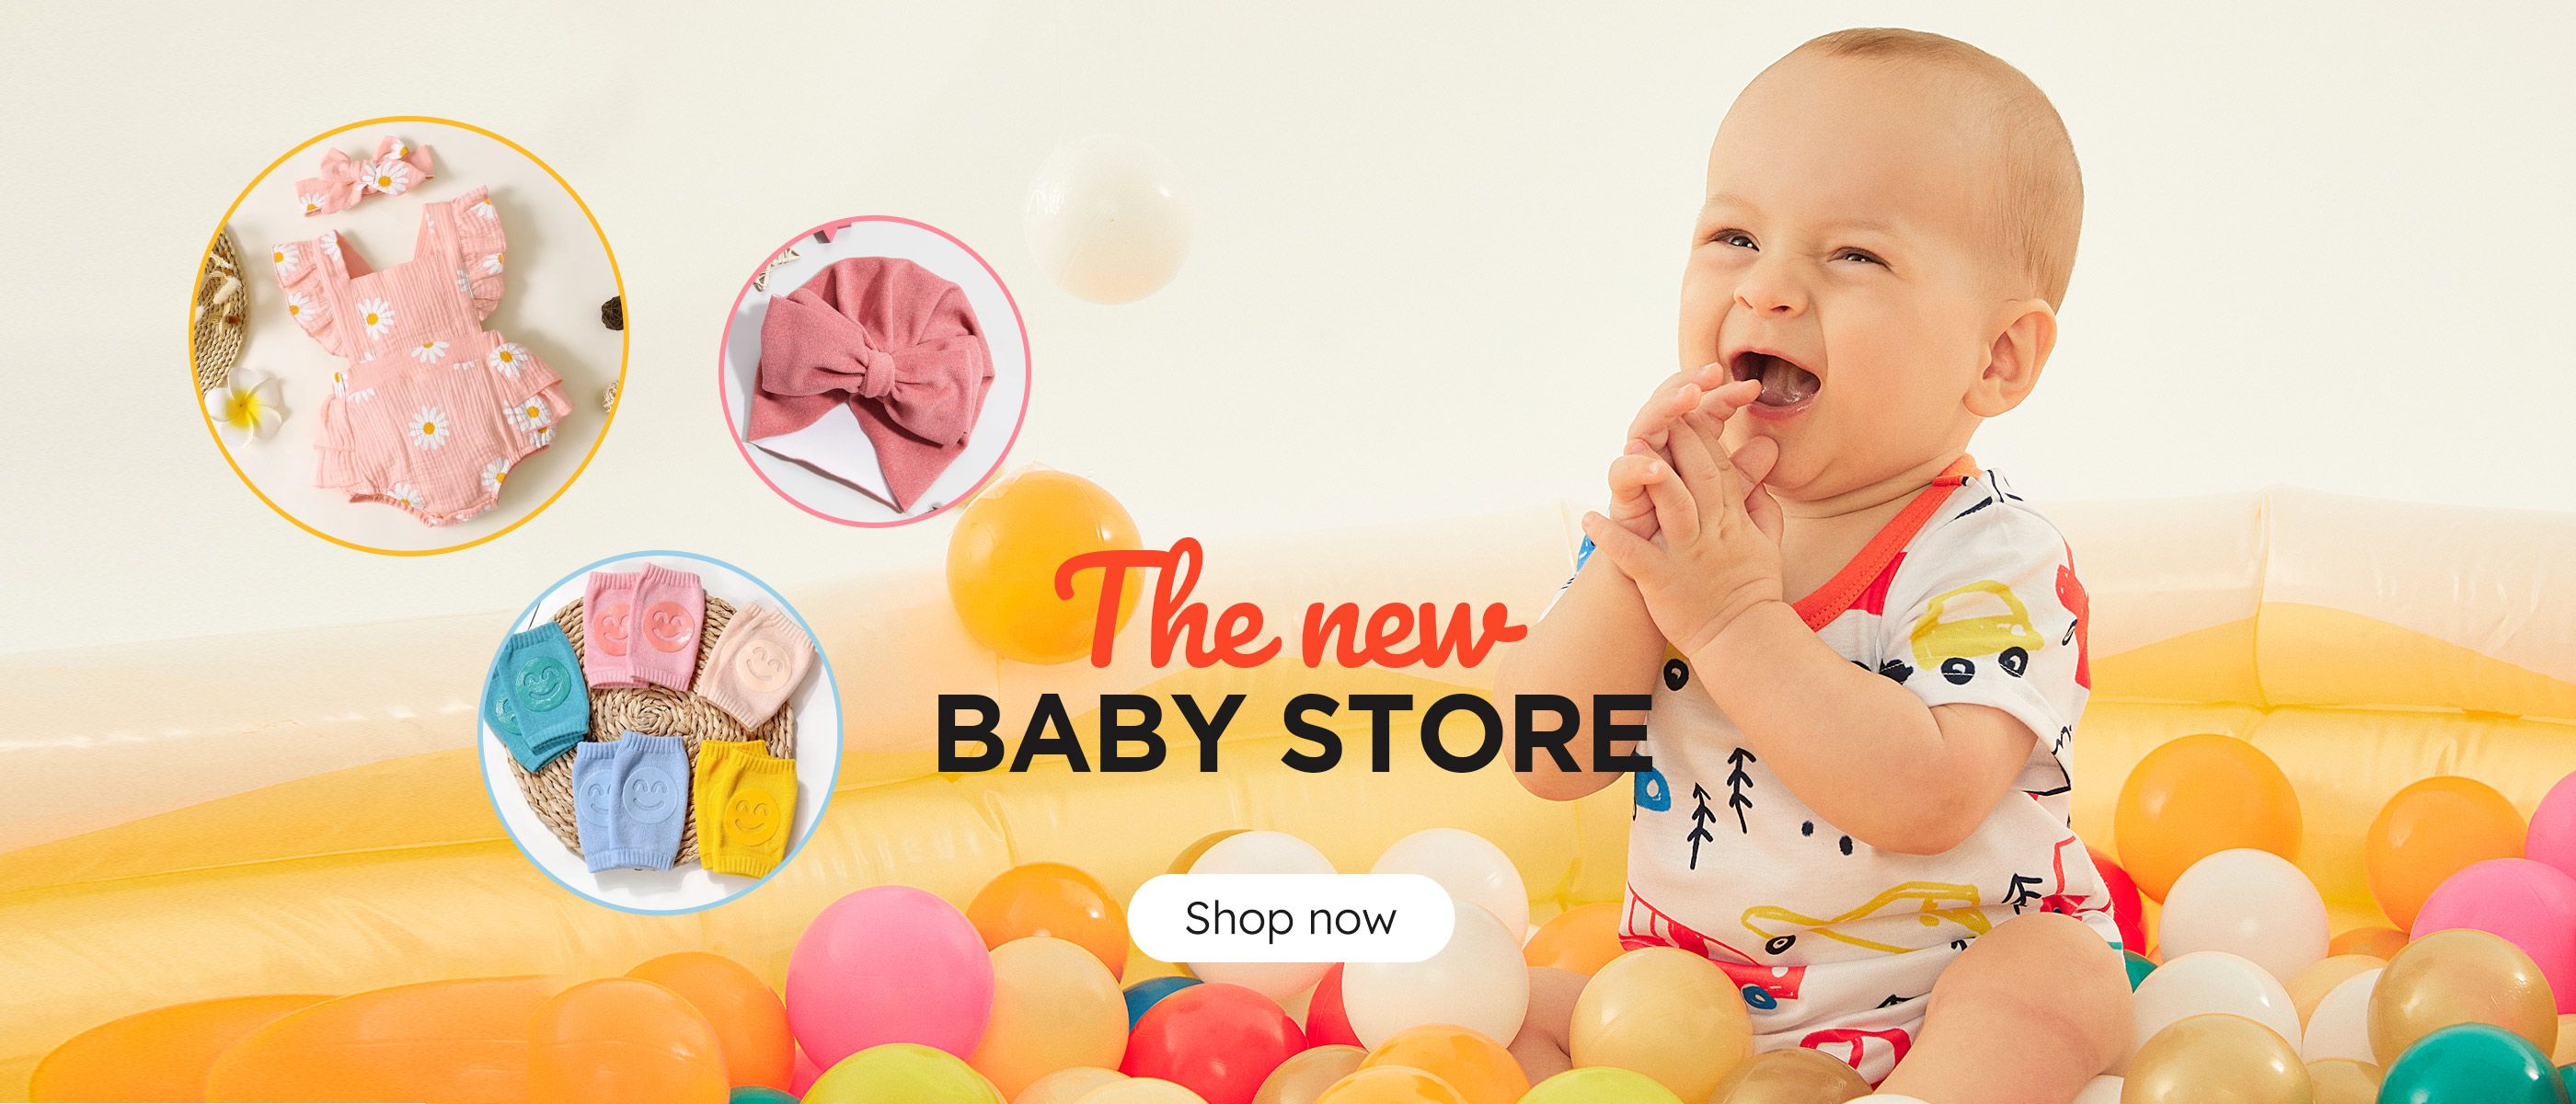 Click it to join The new baby store activity